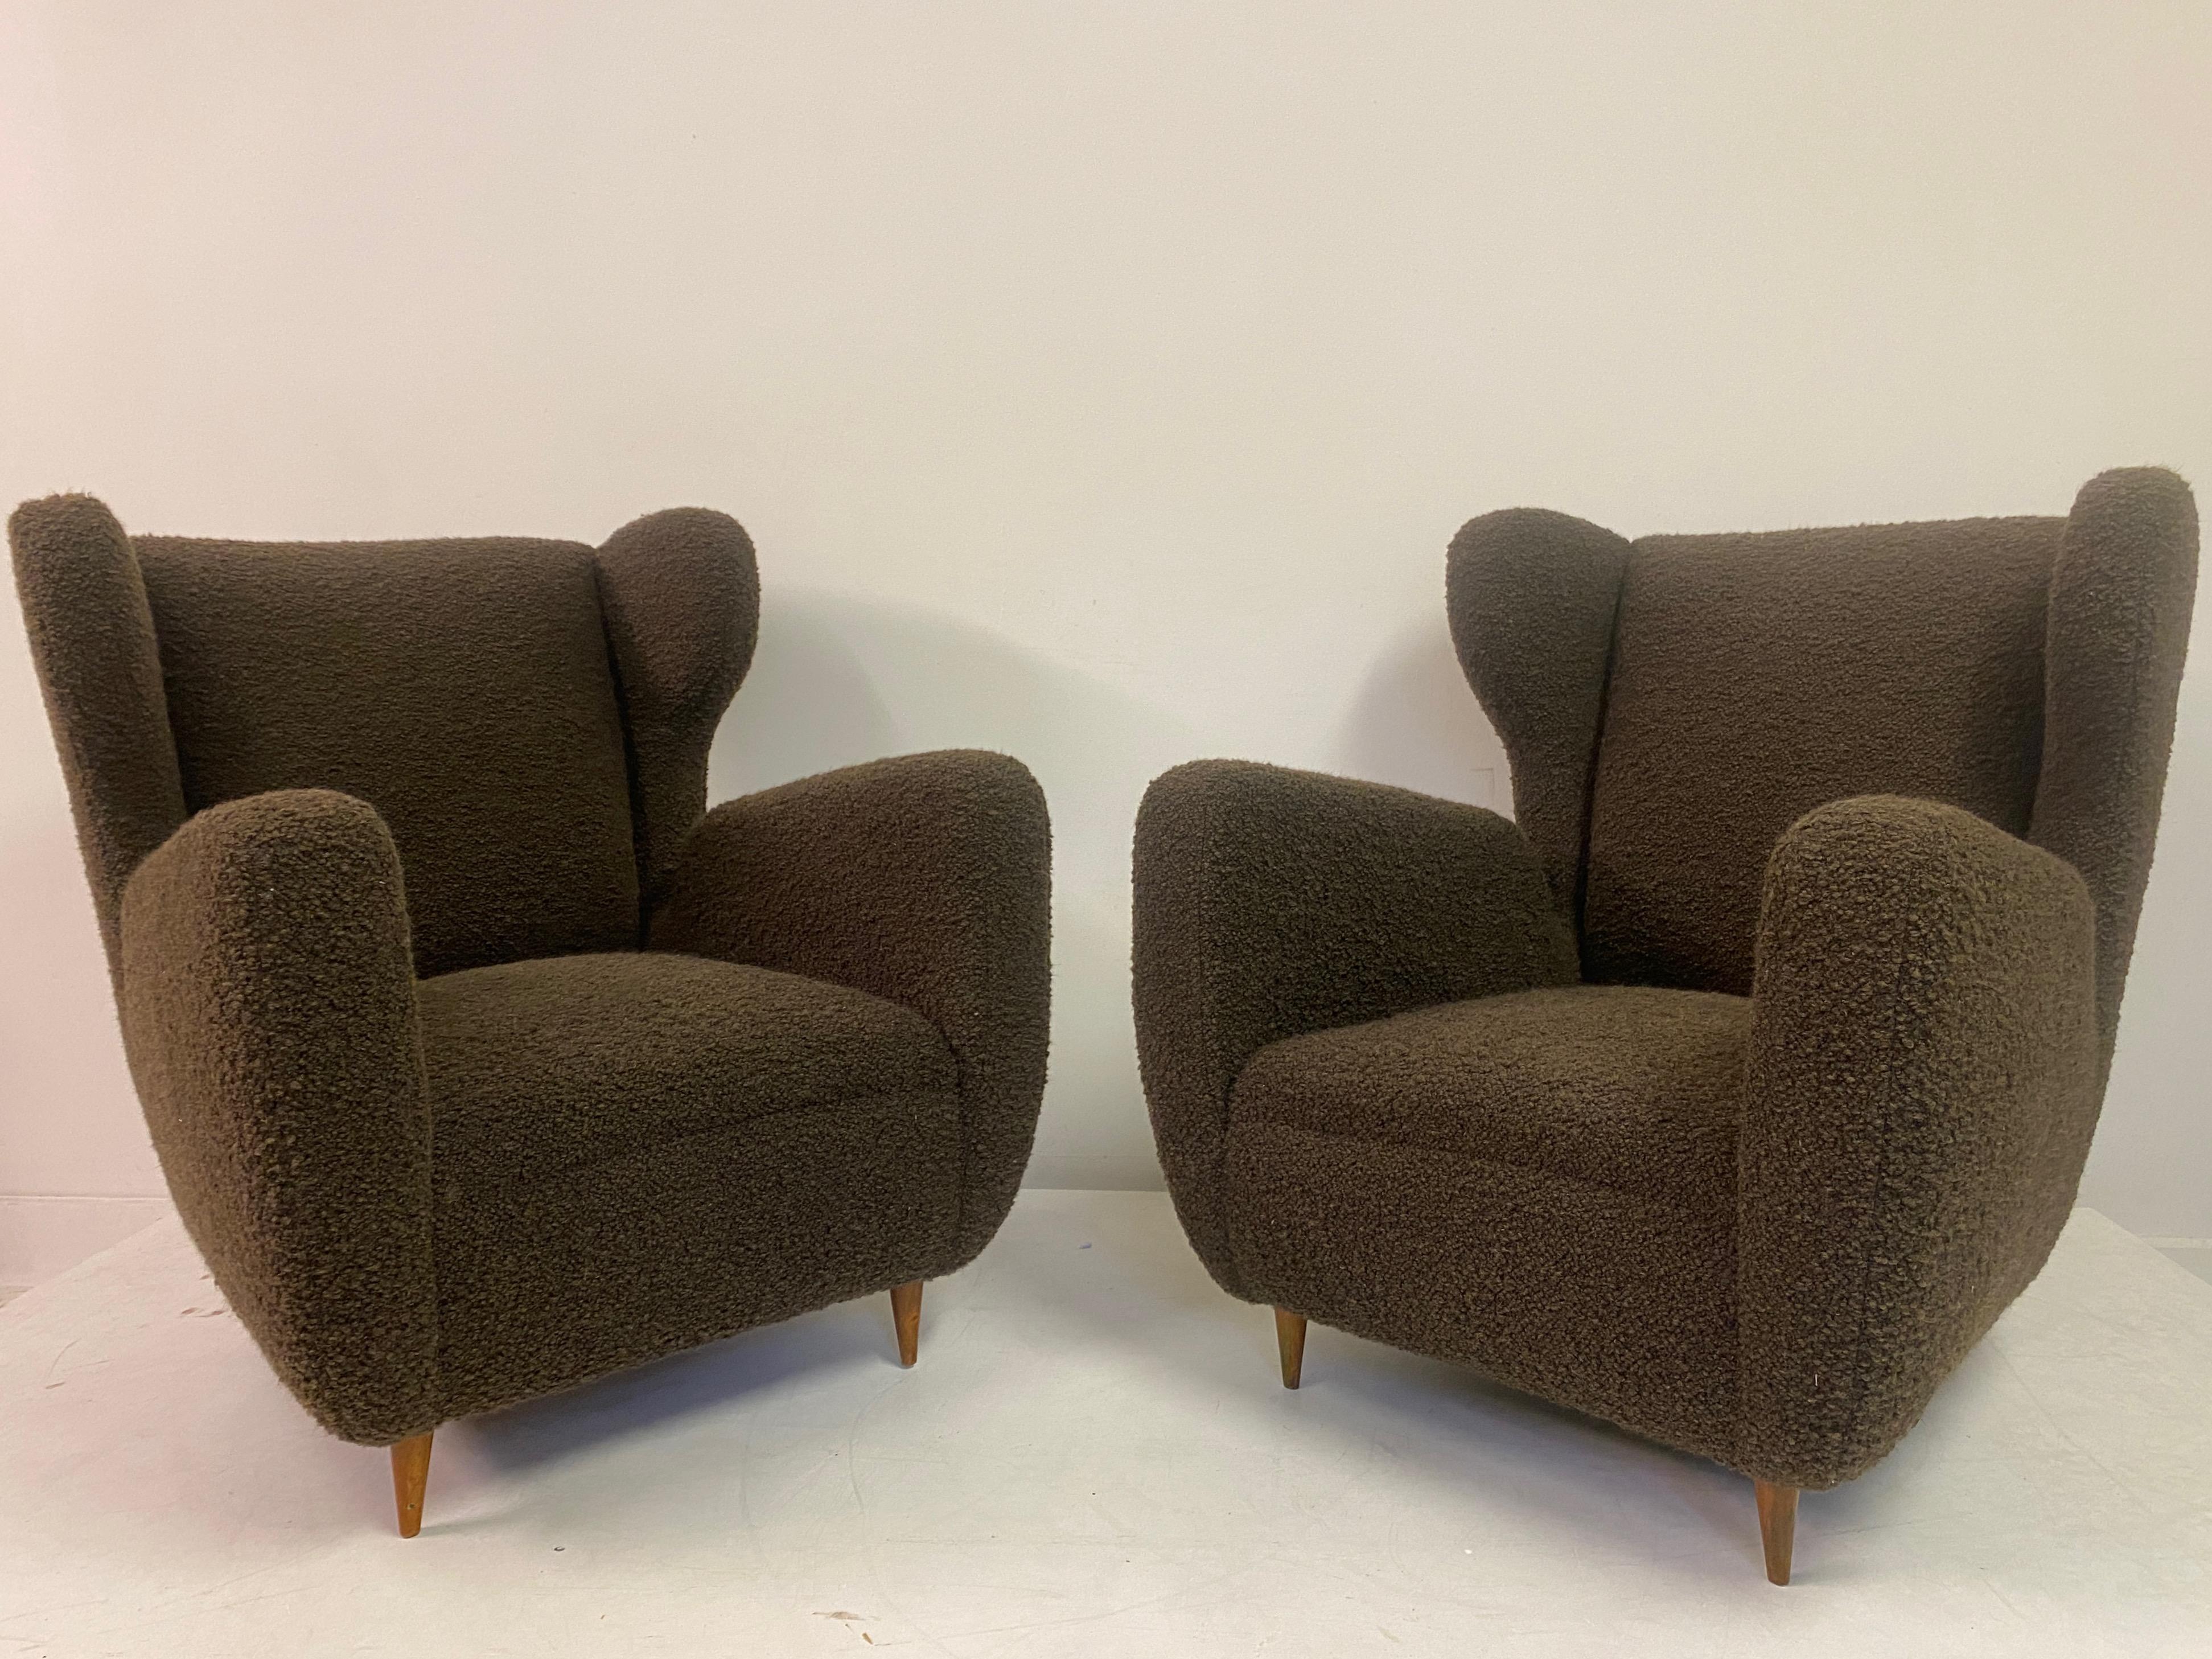 Pair of Large 1950s Italian Armchairs in Chocolate Bouclé In Good Condition For Sale In London, London